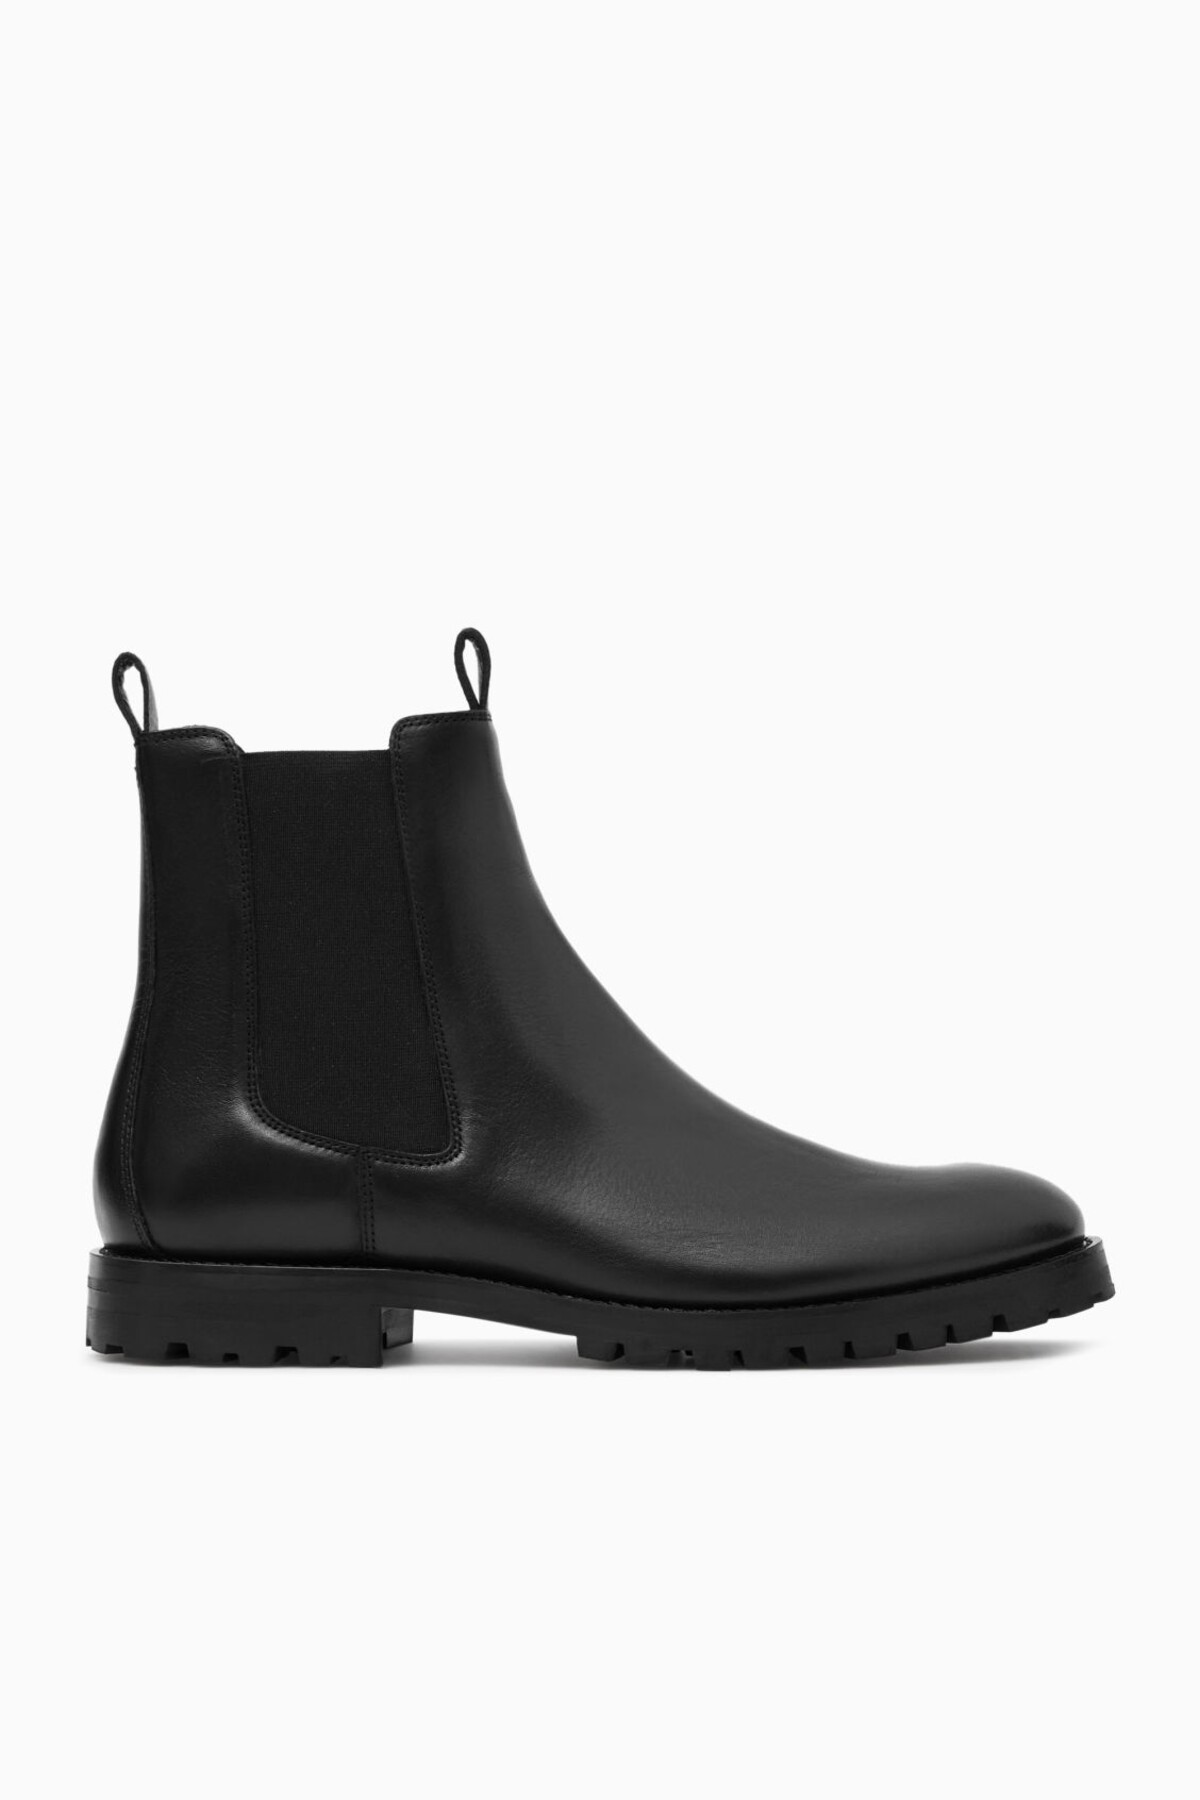 COS Chelsea Leather Boots